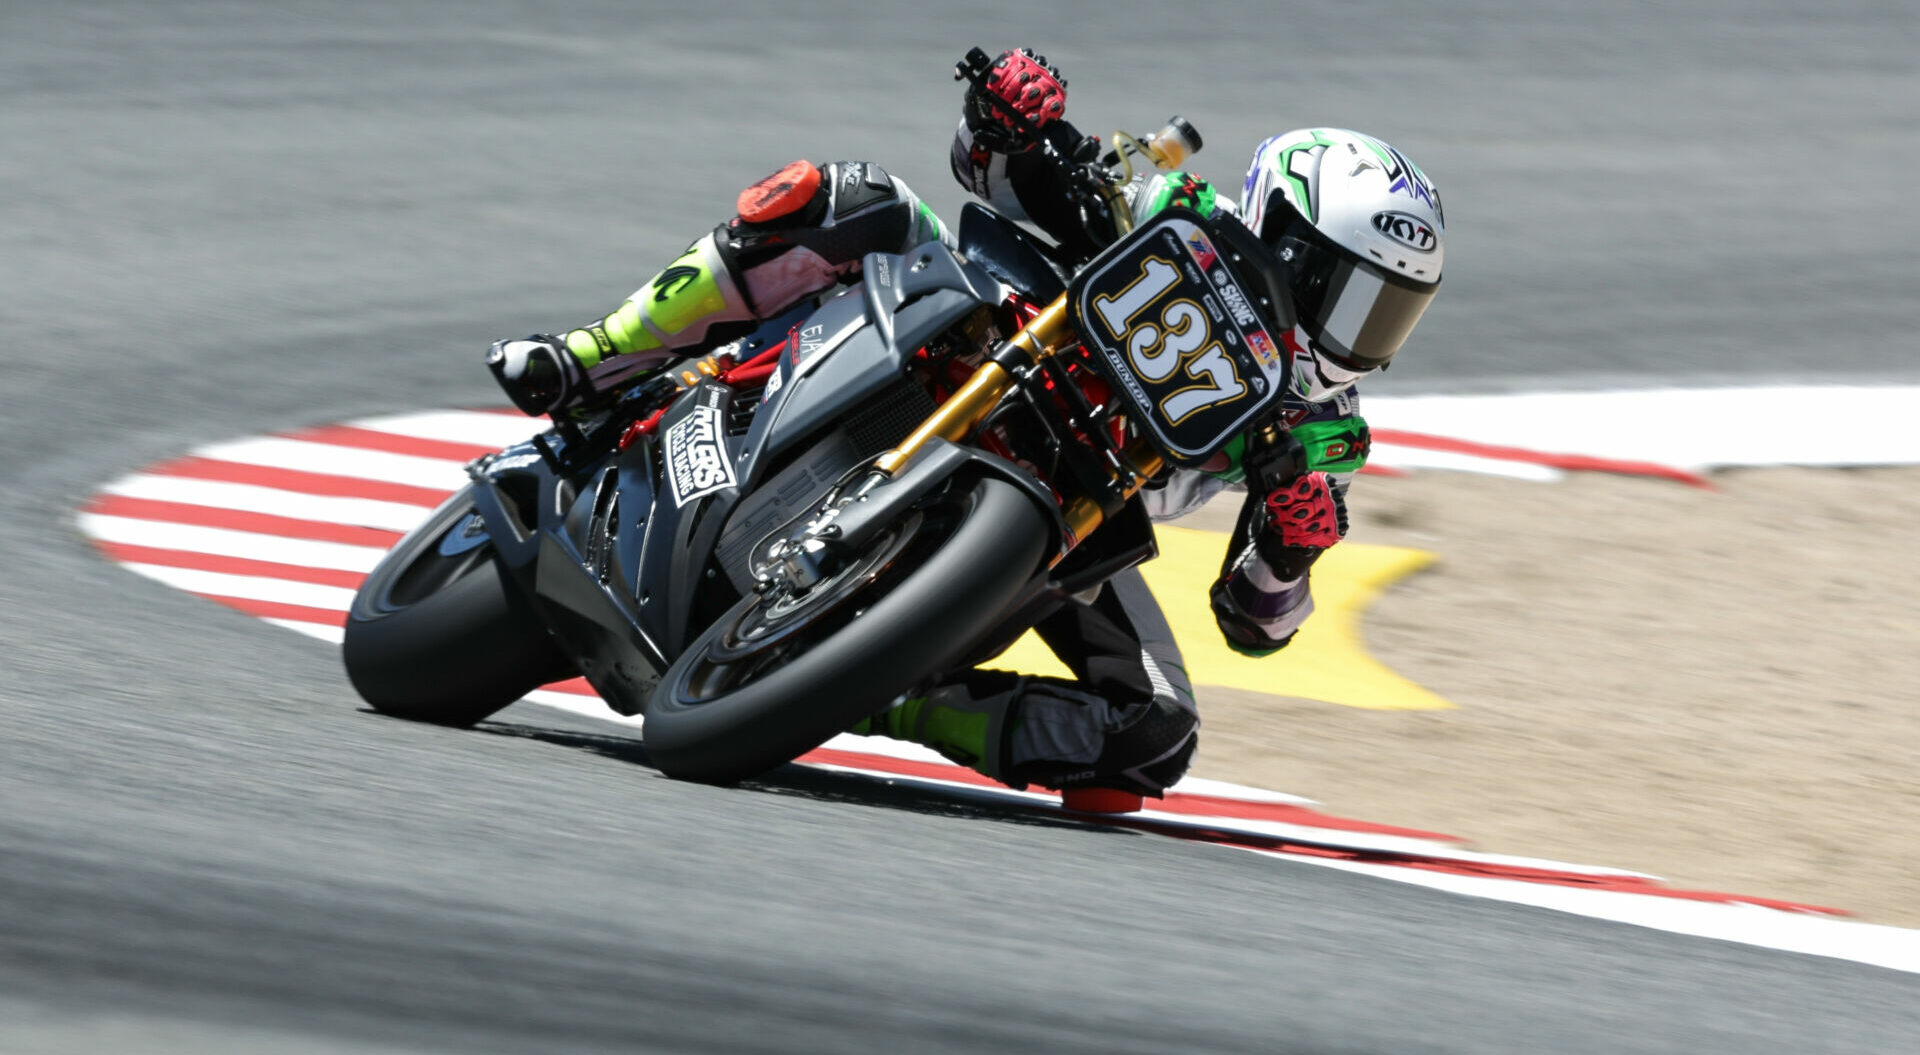 Stefano Mesa (137) at speed on his Tytlers Cycle Racing Energica at Laguna Seca in 2022. Photo courtesy Energica.